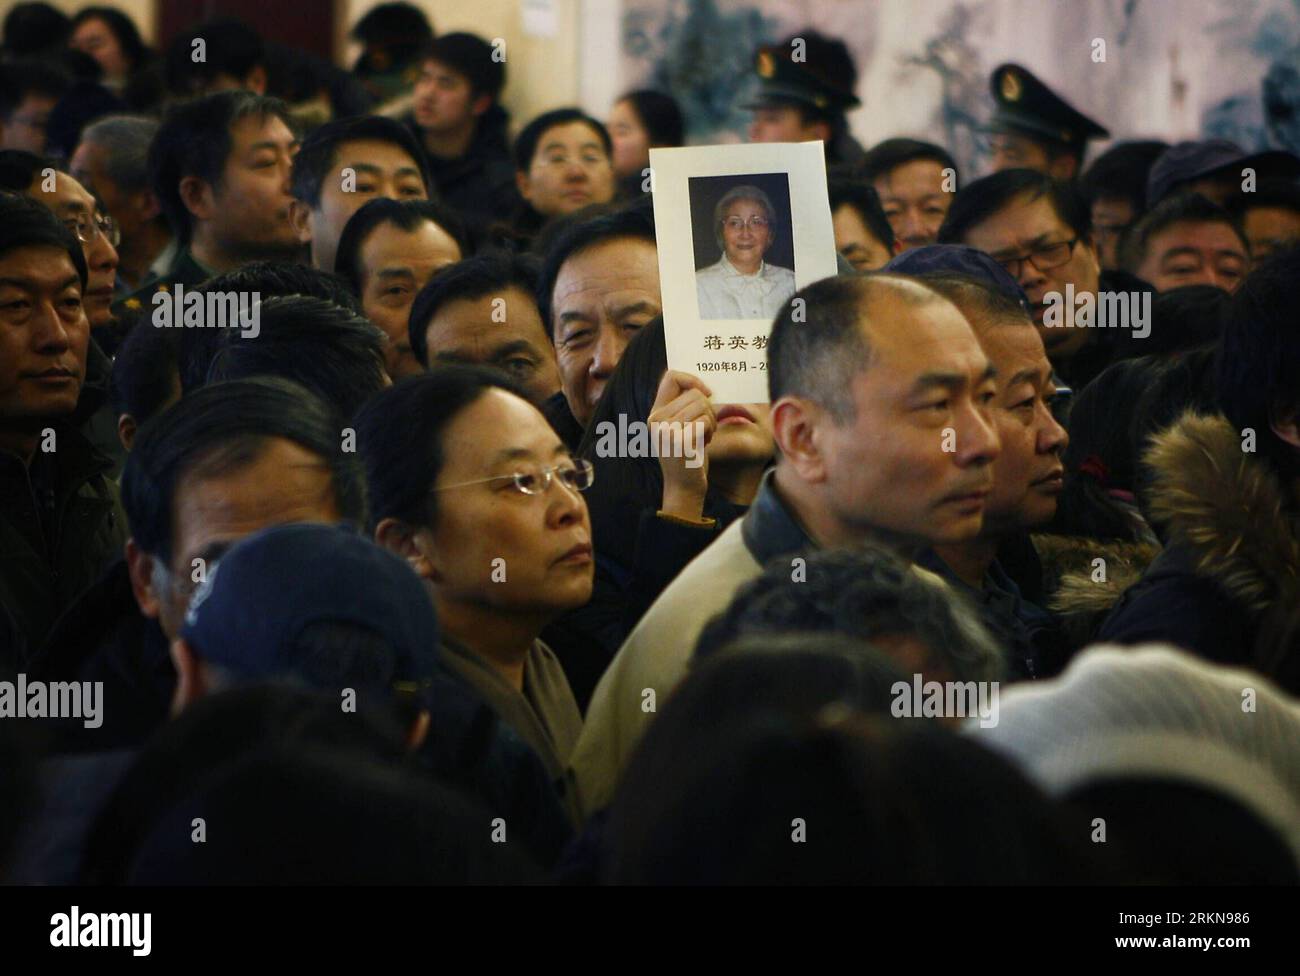 Bildnummer: 57047597  Datum: 10.02.2012  Copyright: imago/Xinhua (120210) -- BEIJING, Feb. 10, 2012 (Xinhua) -- attend the mourning ceremony of Jiang Ying, an opera singer and music educator and wife of China s late rocket scientist Qian Xuesen, in Beijing, capital of China, Feb. 10, 2012. Jiang died on Sunday of respiratory and heart failure in Beijing at the age of 93. (Xinhua/Wan Xiang) (zgp) CHINA-BEIJING-JIANG YING-MOURNING CEREMONY (CN) PUBLICATIONxNOTxINxCHN People Kultur Musik Trauer Gedenken xbs x0x 2012 quer      57047597 Date 10 02 2012 Copyright Imago XINHUA  Beijing Feb 10 2012 XI Stock Photo